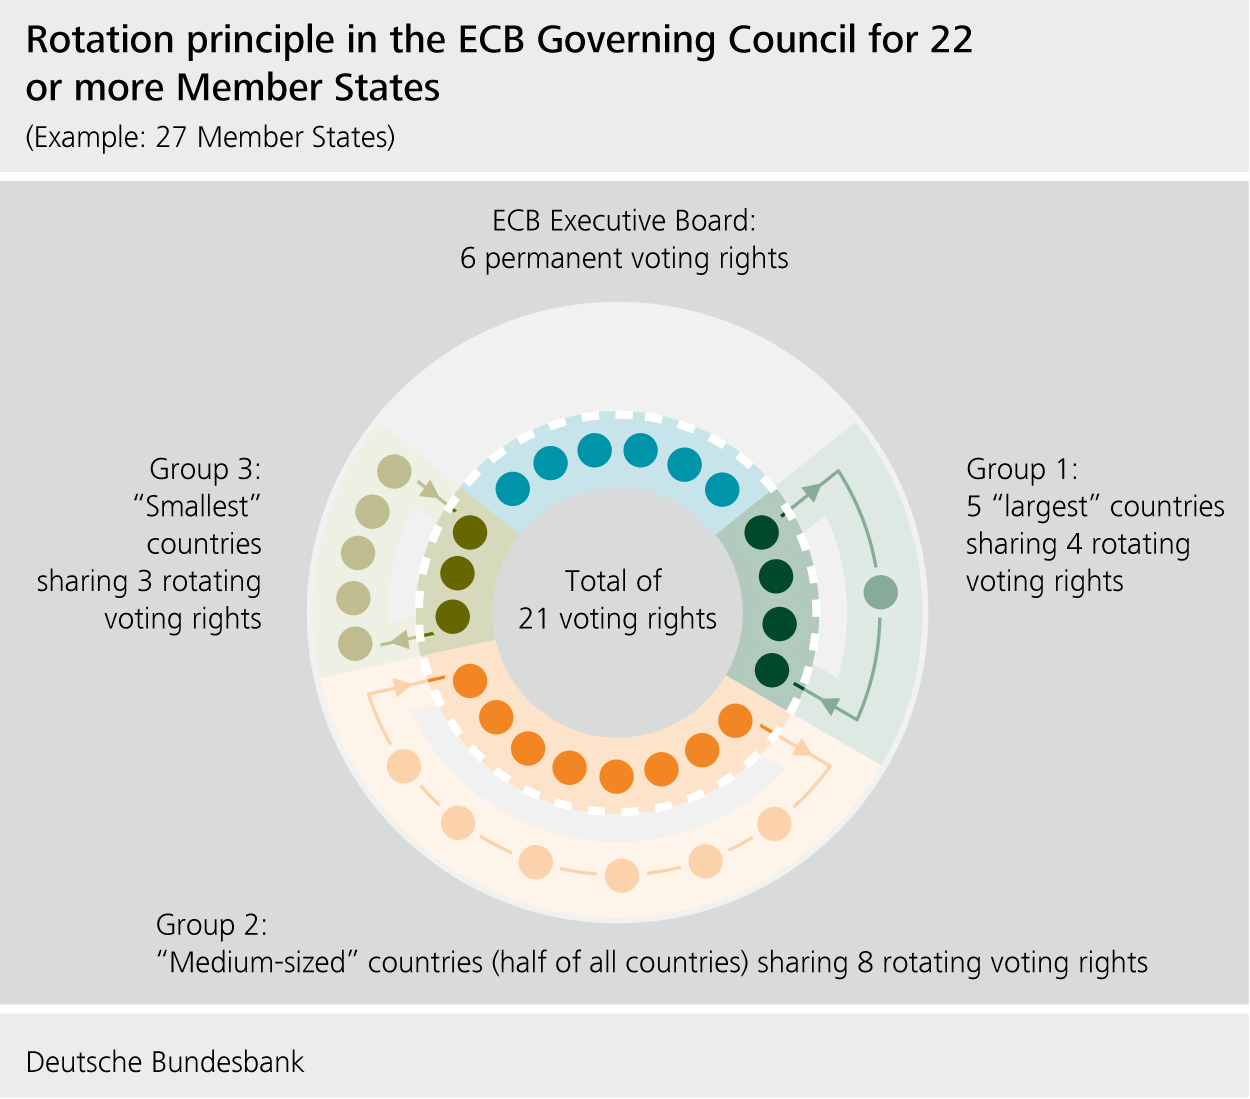 Rotation principle in the Governing Council with 22 member states